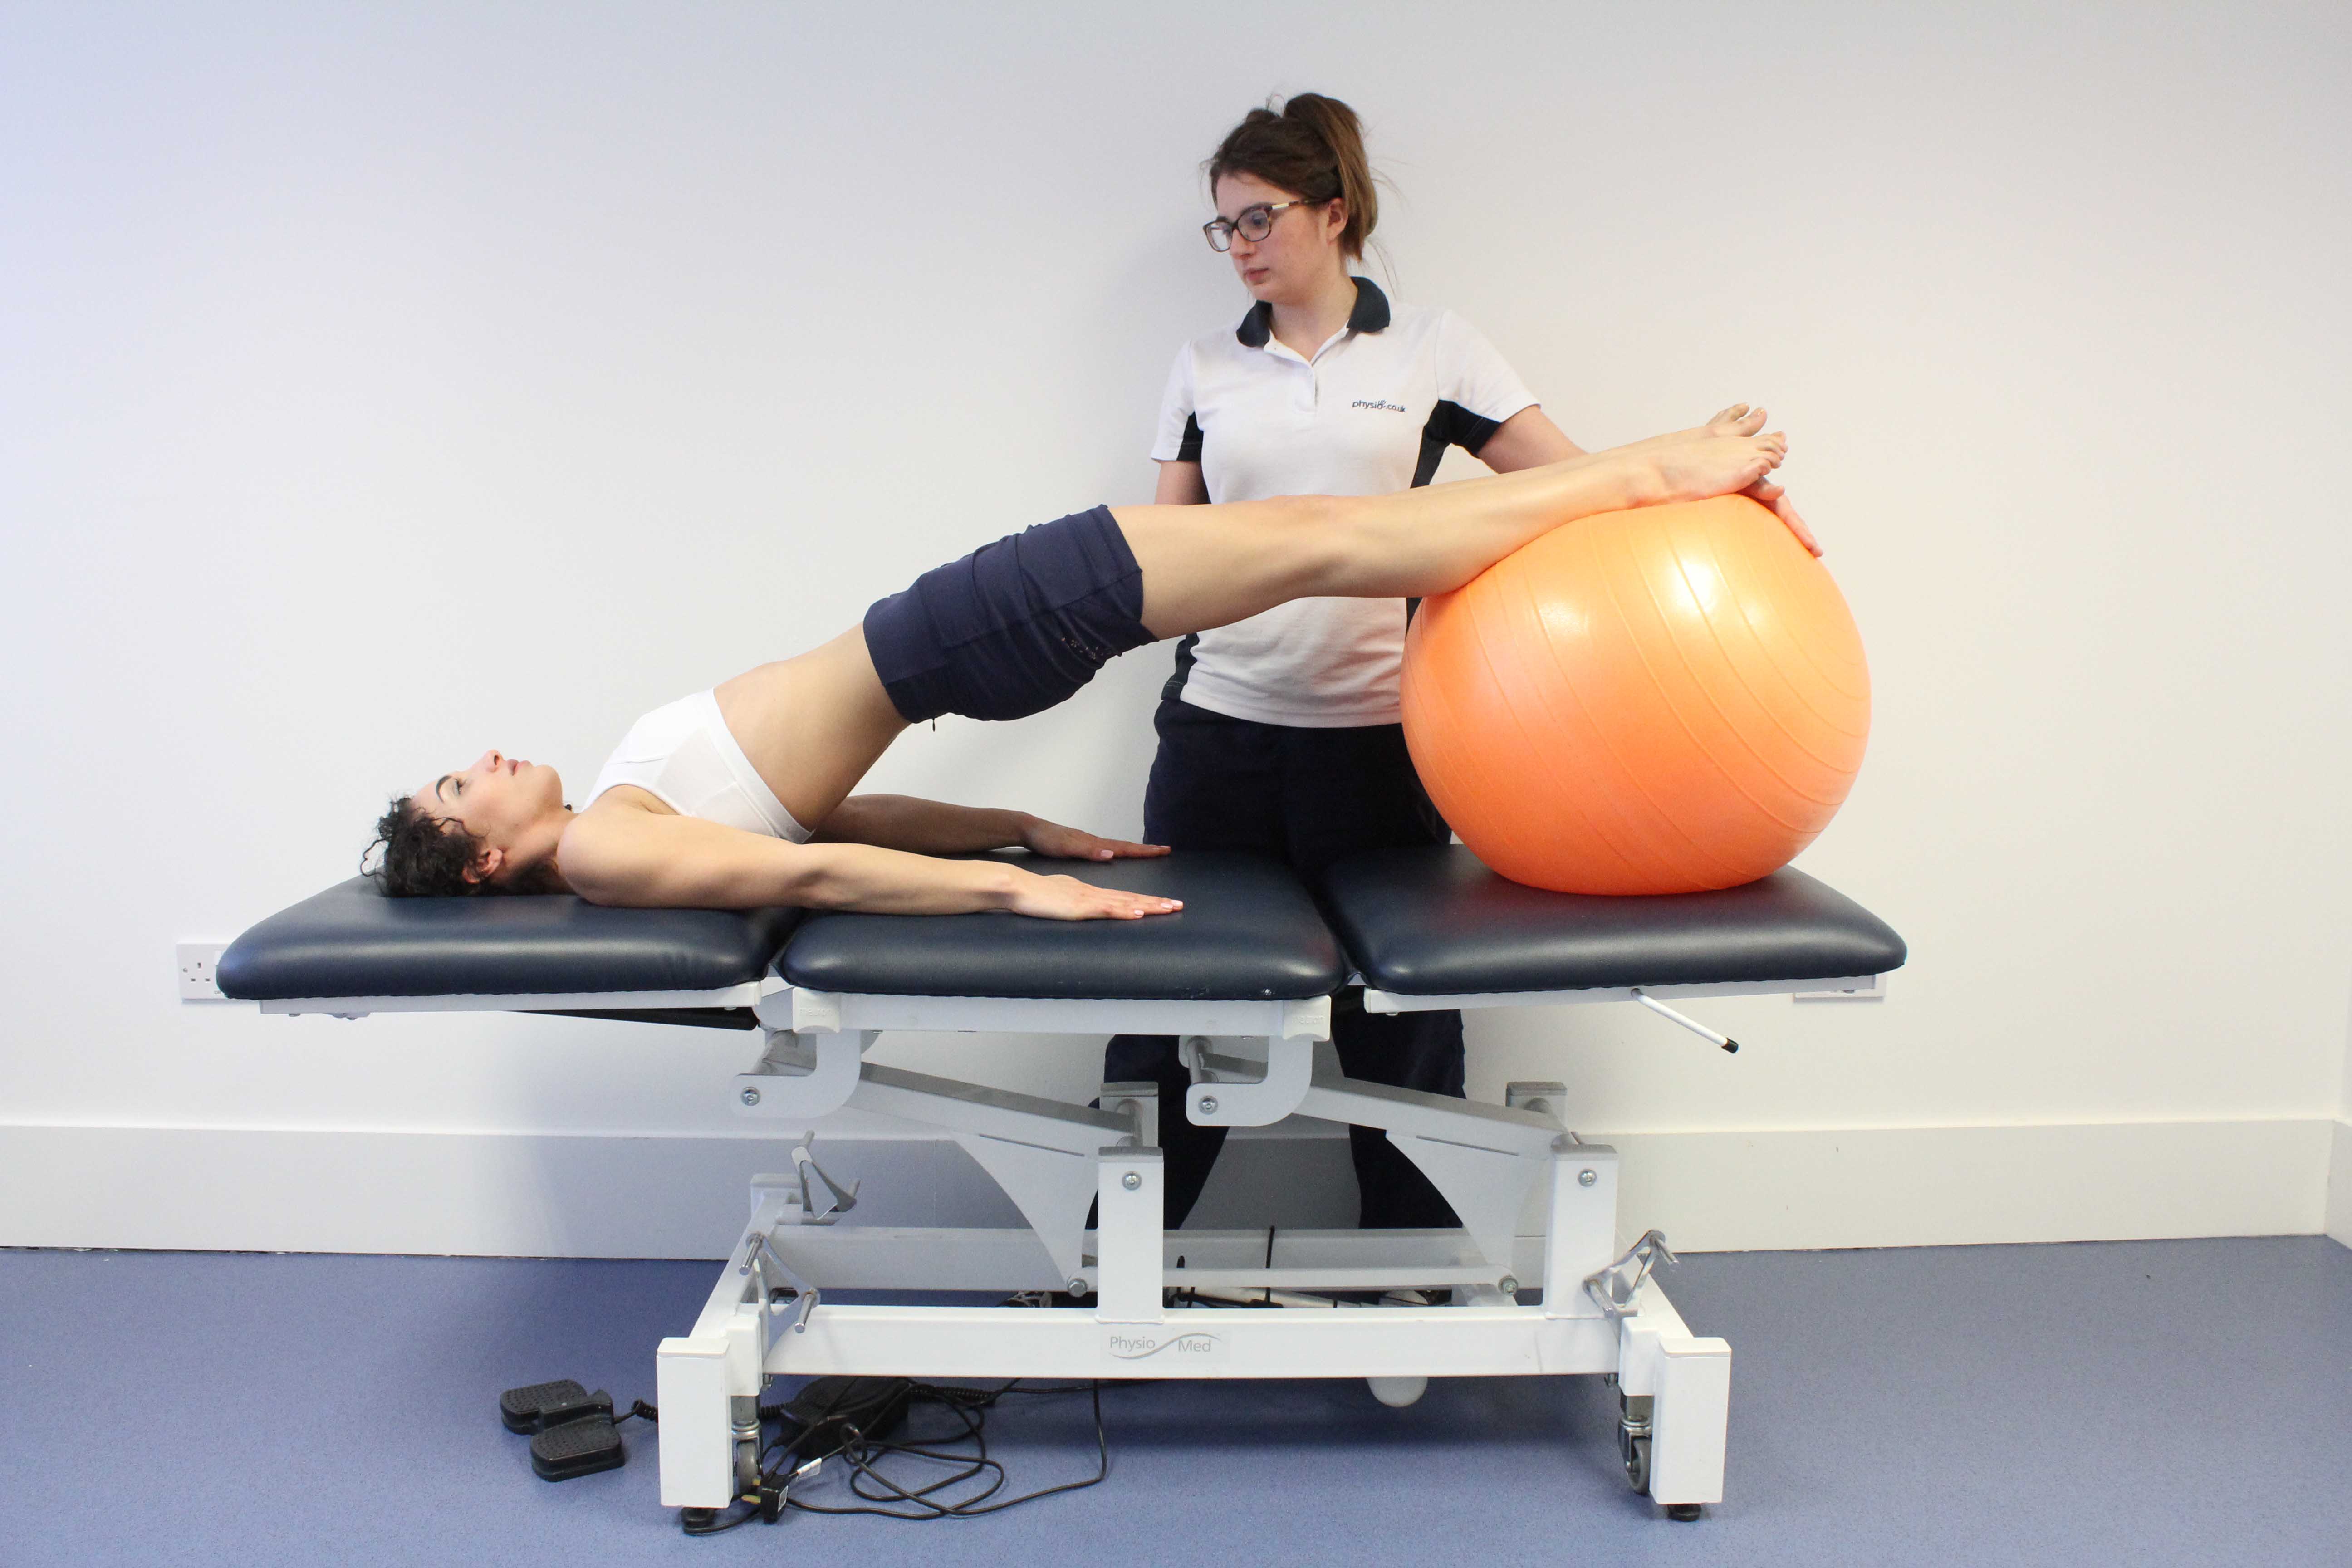 https://www.physio.co.uk/images/core-stability-exercises/core-stability-exercises1.jpg